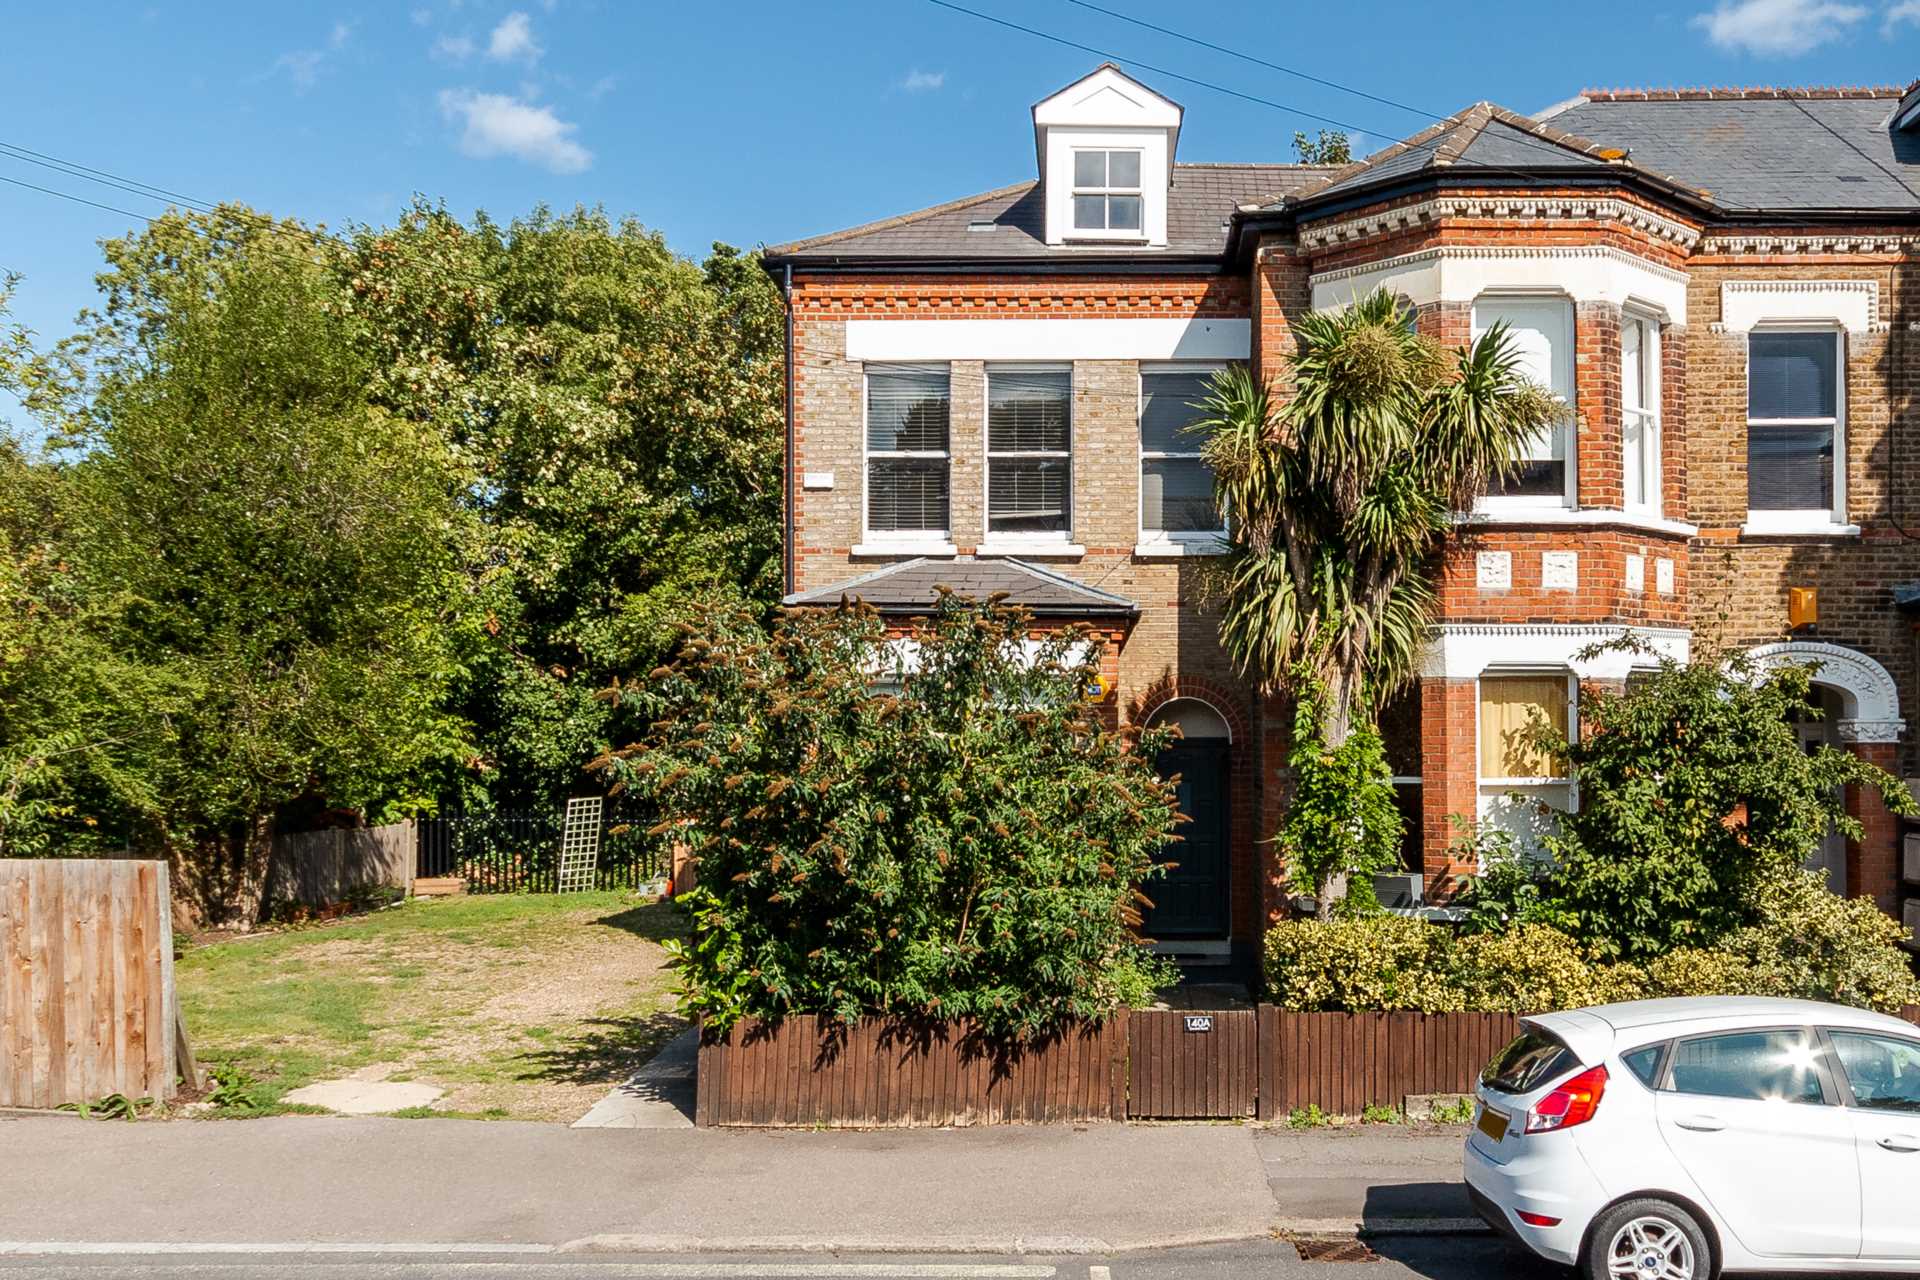 Croxted Road, West Dulwich, SE21 8NR, Image 11